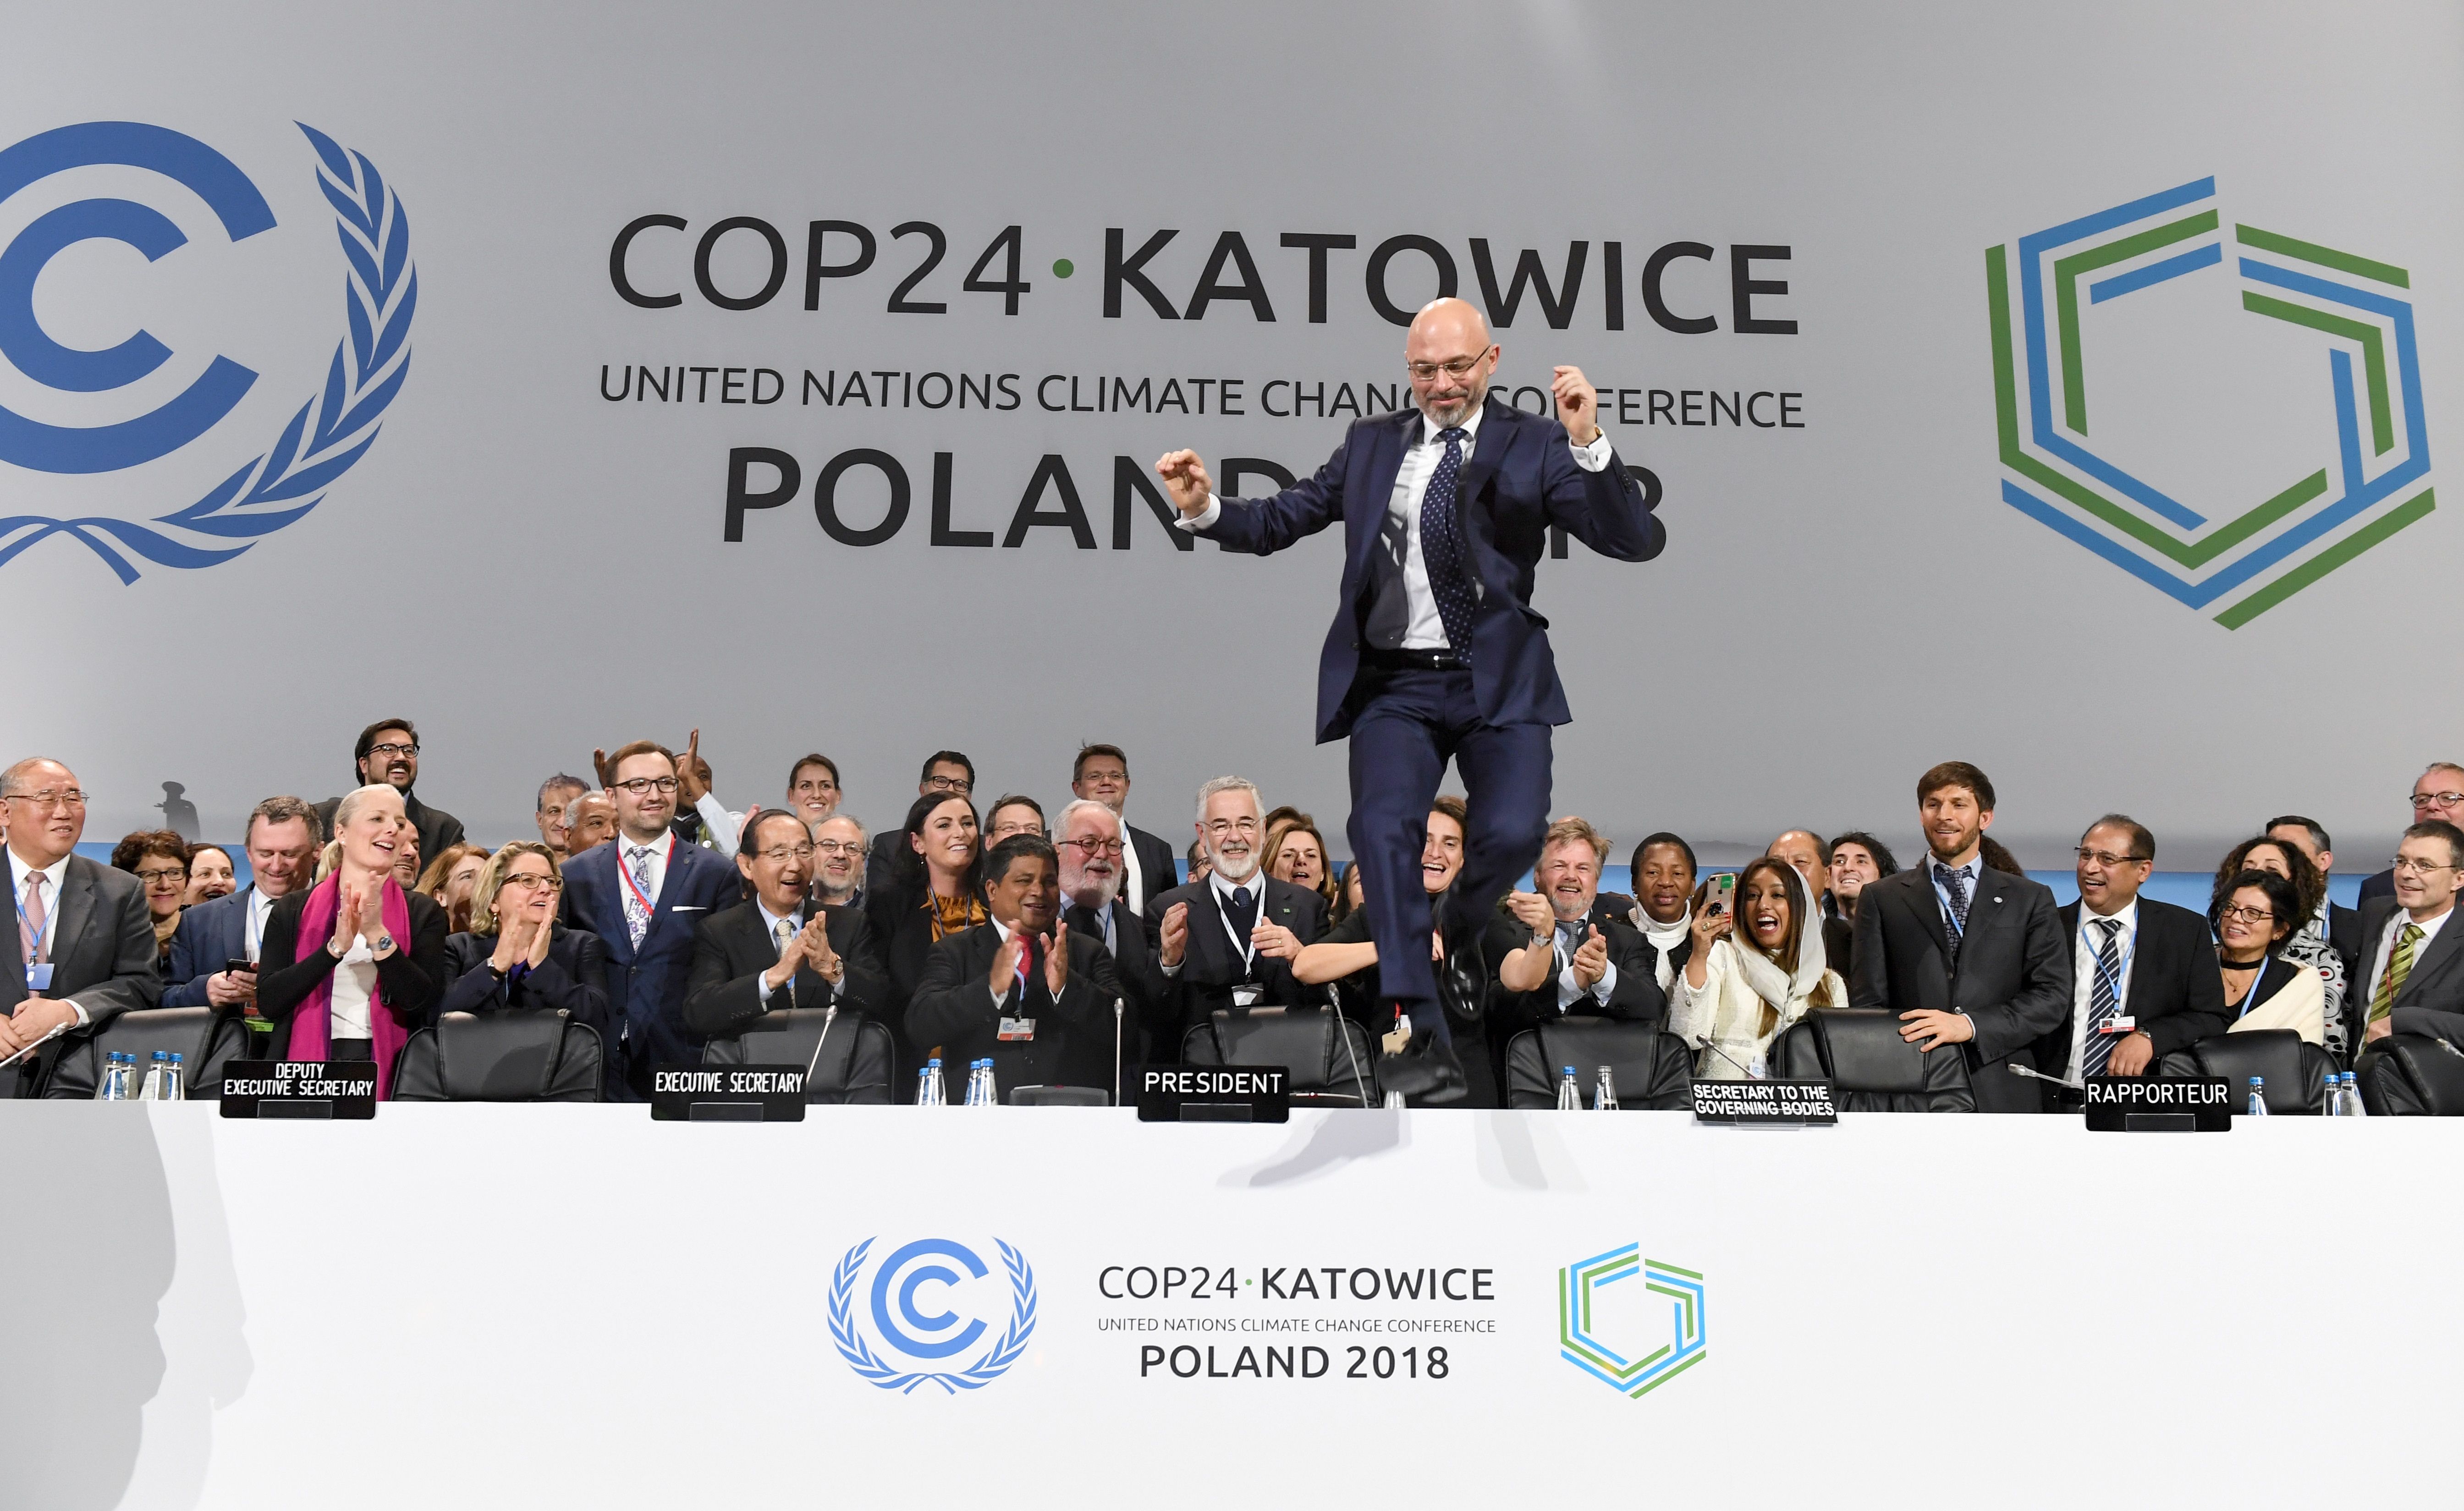 COP24 President Michal Kurtyka celebrates at the end of the conference's final session.